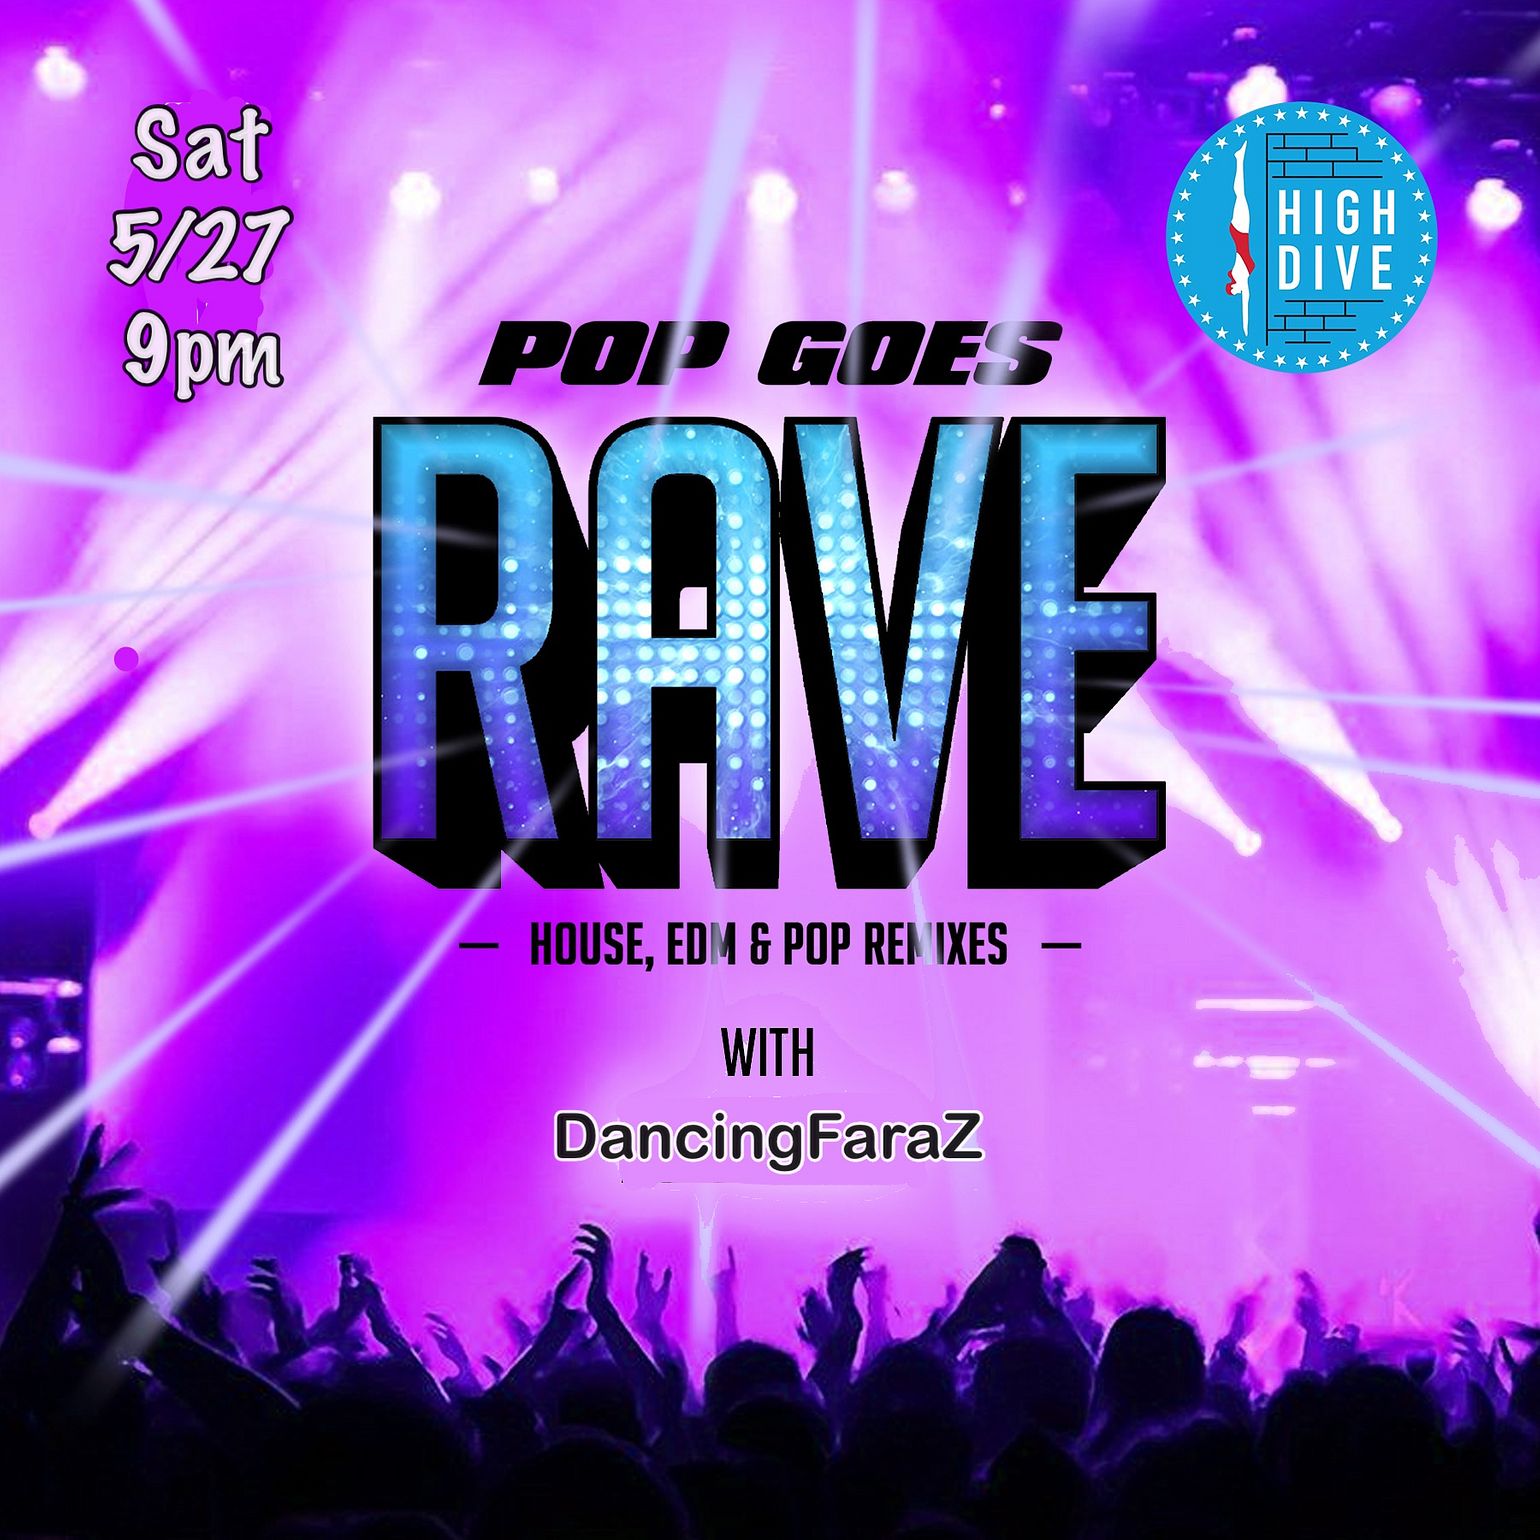 POP GOES RAVE! Dance Party Tickets at High Dive in Seattle by High Dive